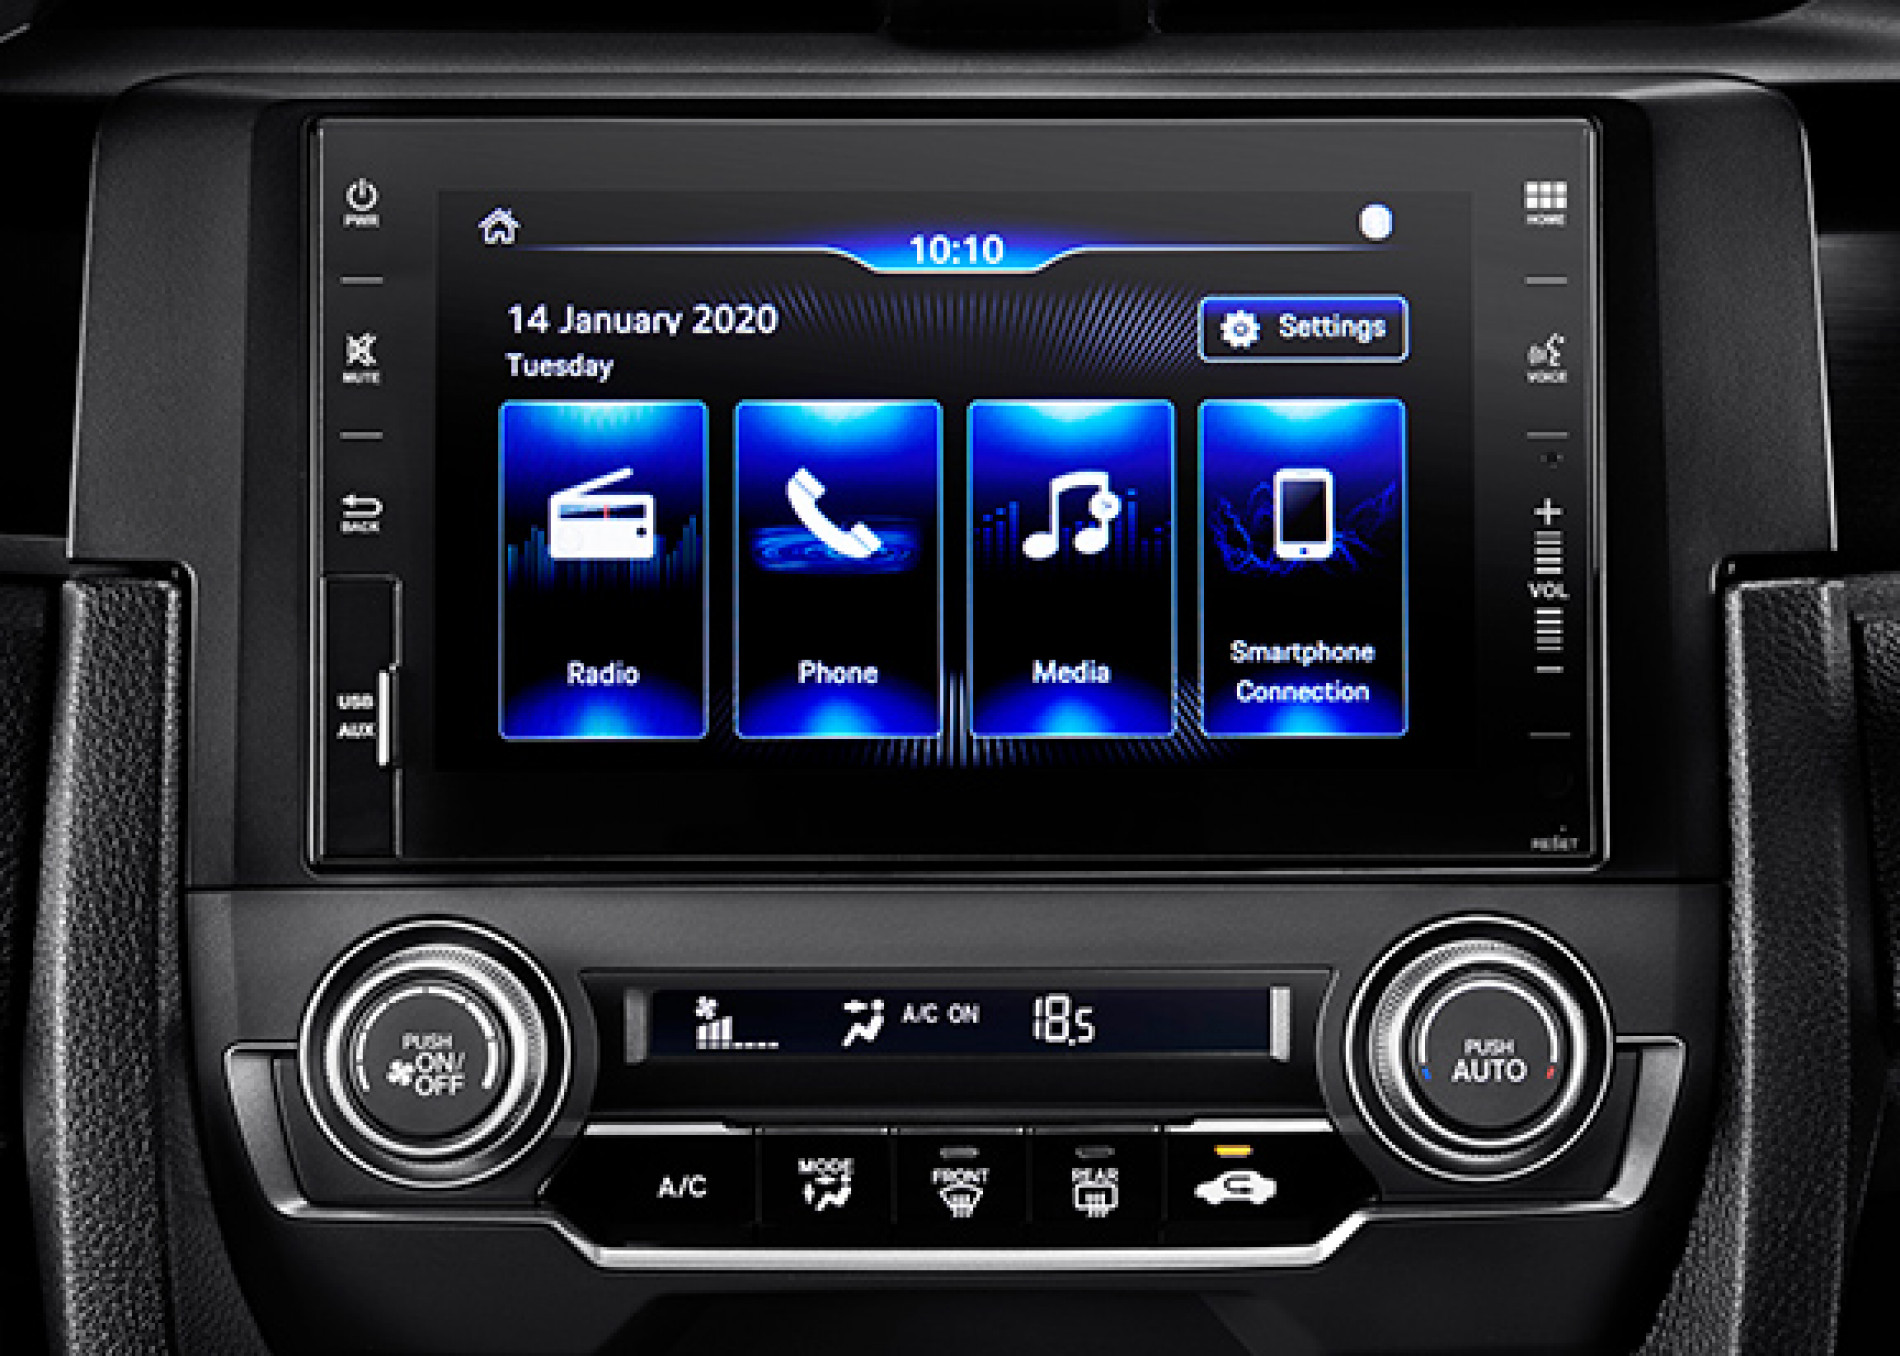 NEW-7”-CAPACITIVE-TOUCHSCREEN-DISPLAY-AUDIO-AM-FM-RADIO-AUX-IN-PORT-USB-PORT-SMARTPHONE-CONNECTION-BLUETOOTH